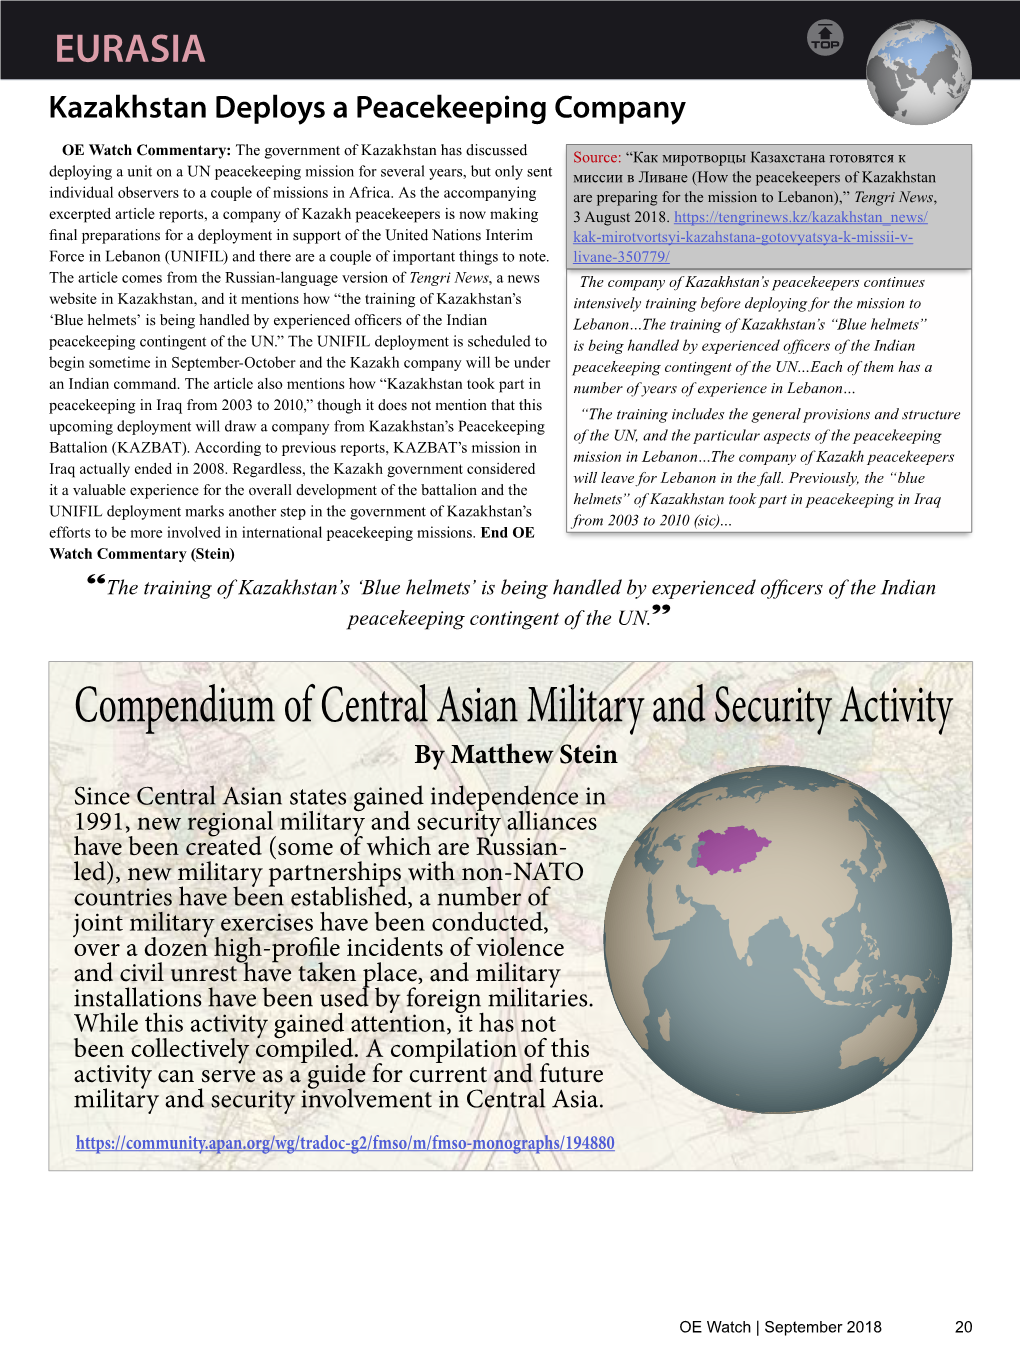 Compendium of Central Asian Military and Security Activity